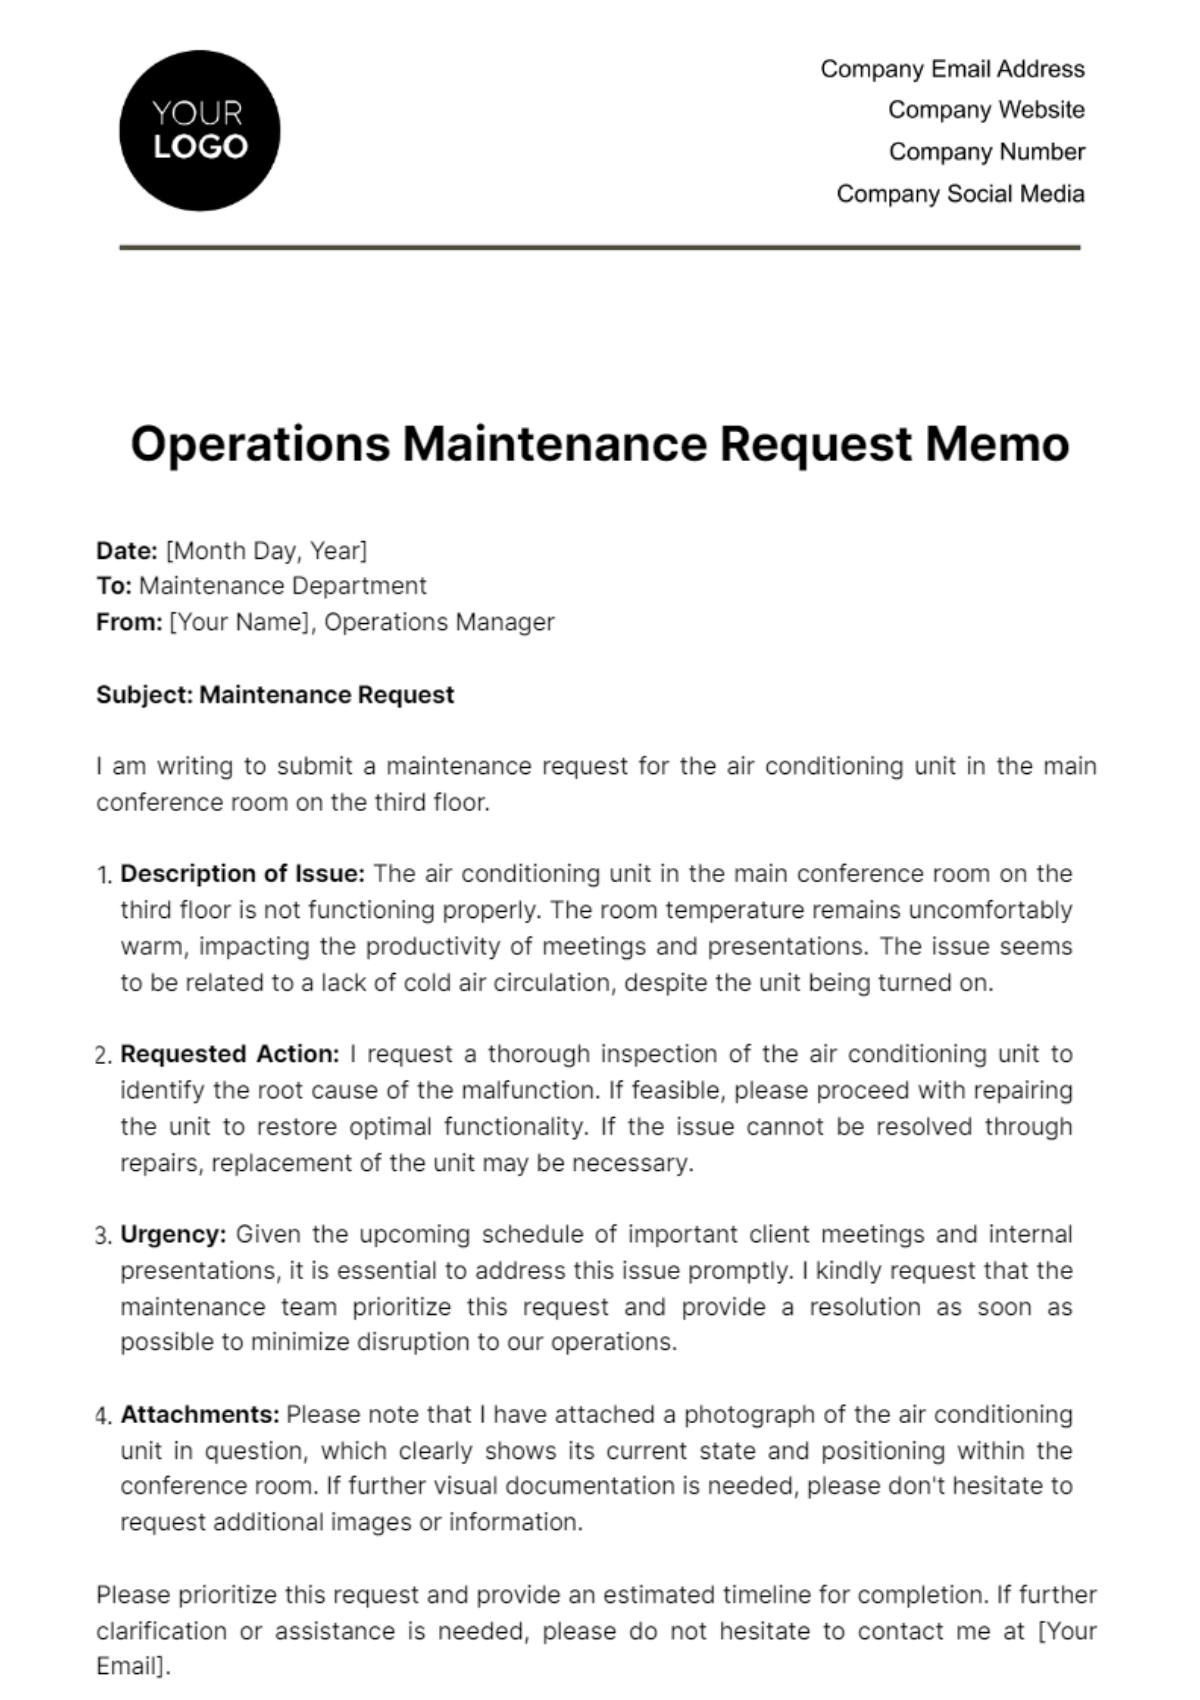 Free Operations Maintenance Request Memo Template